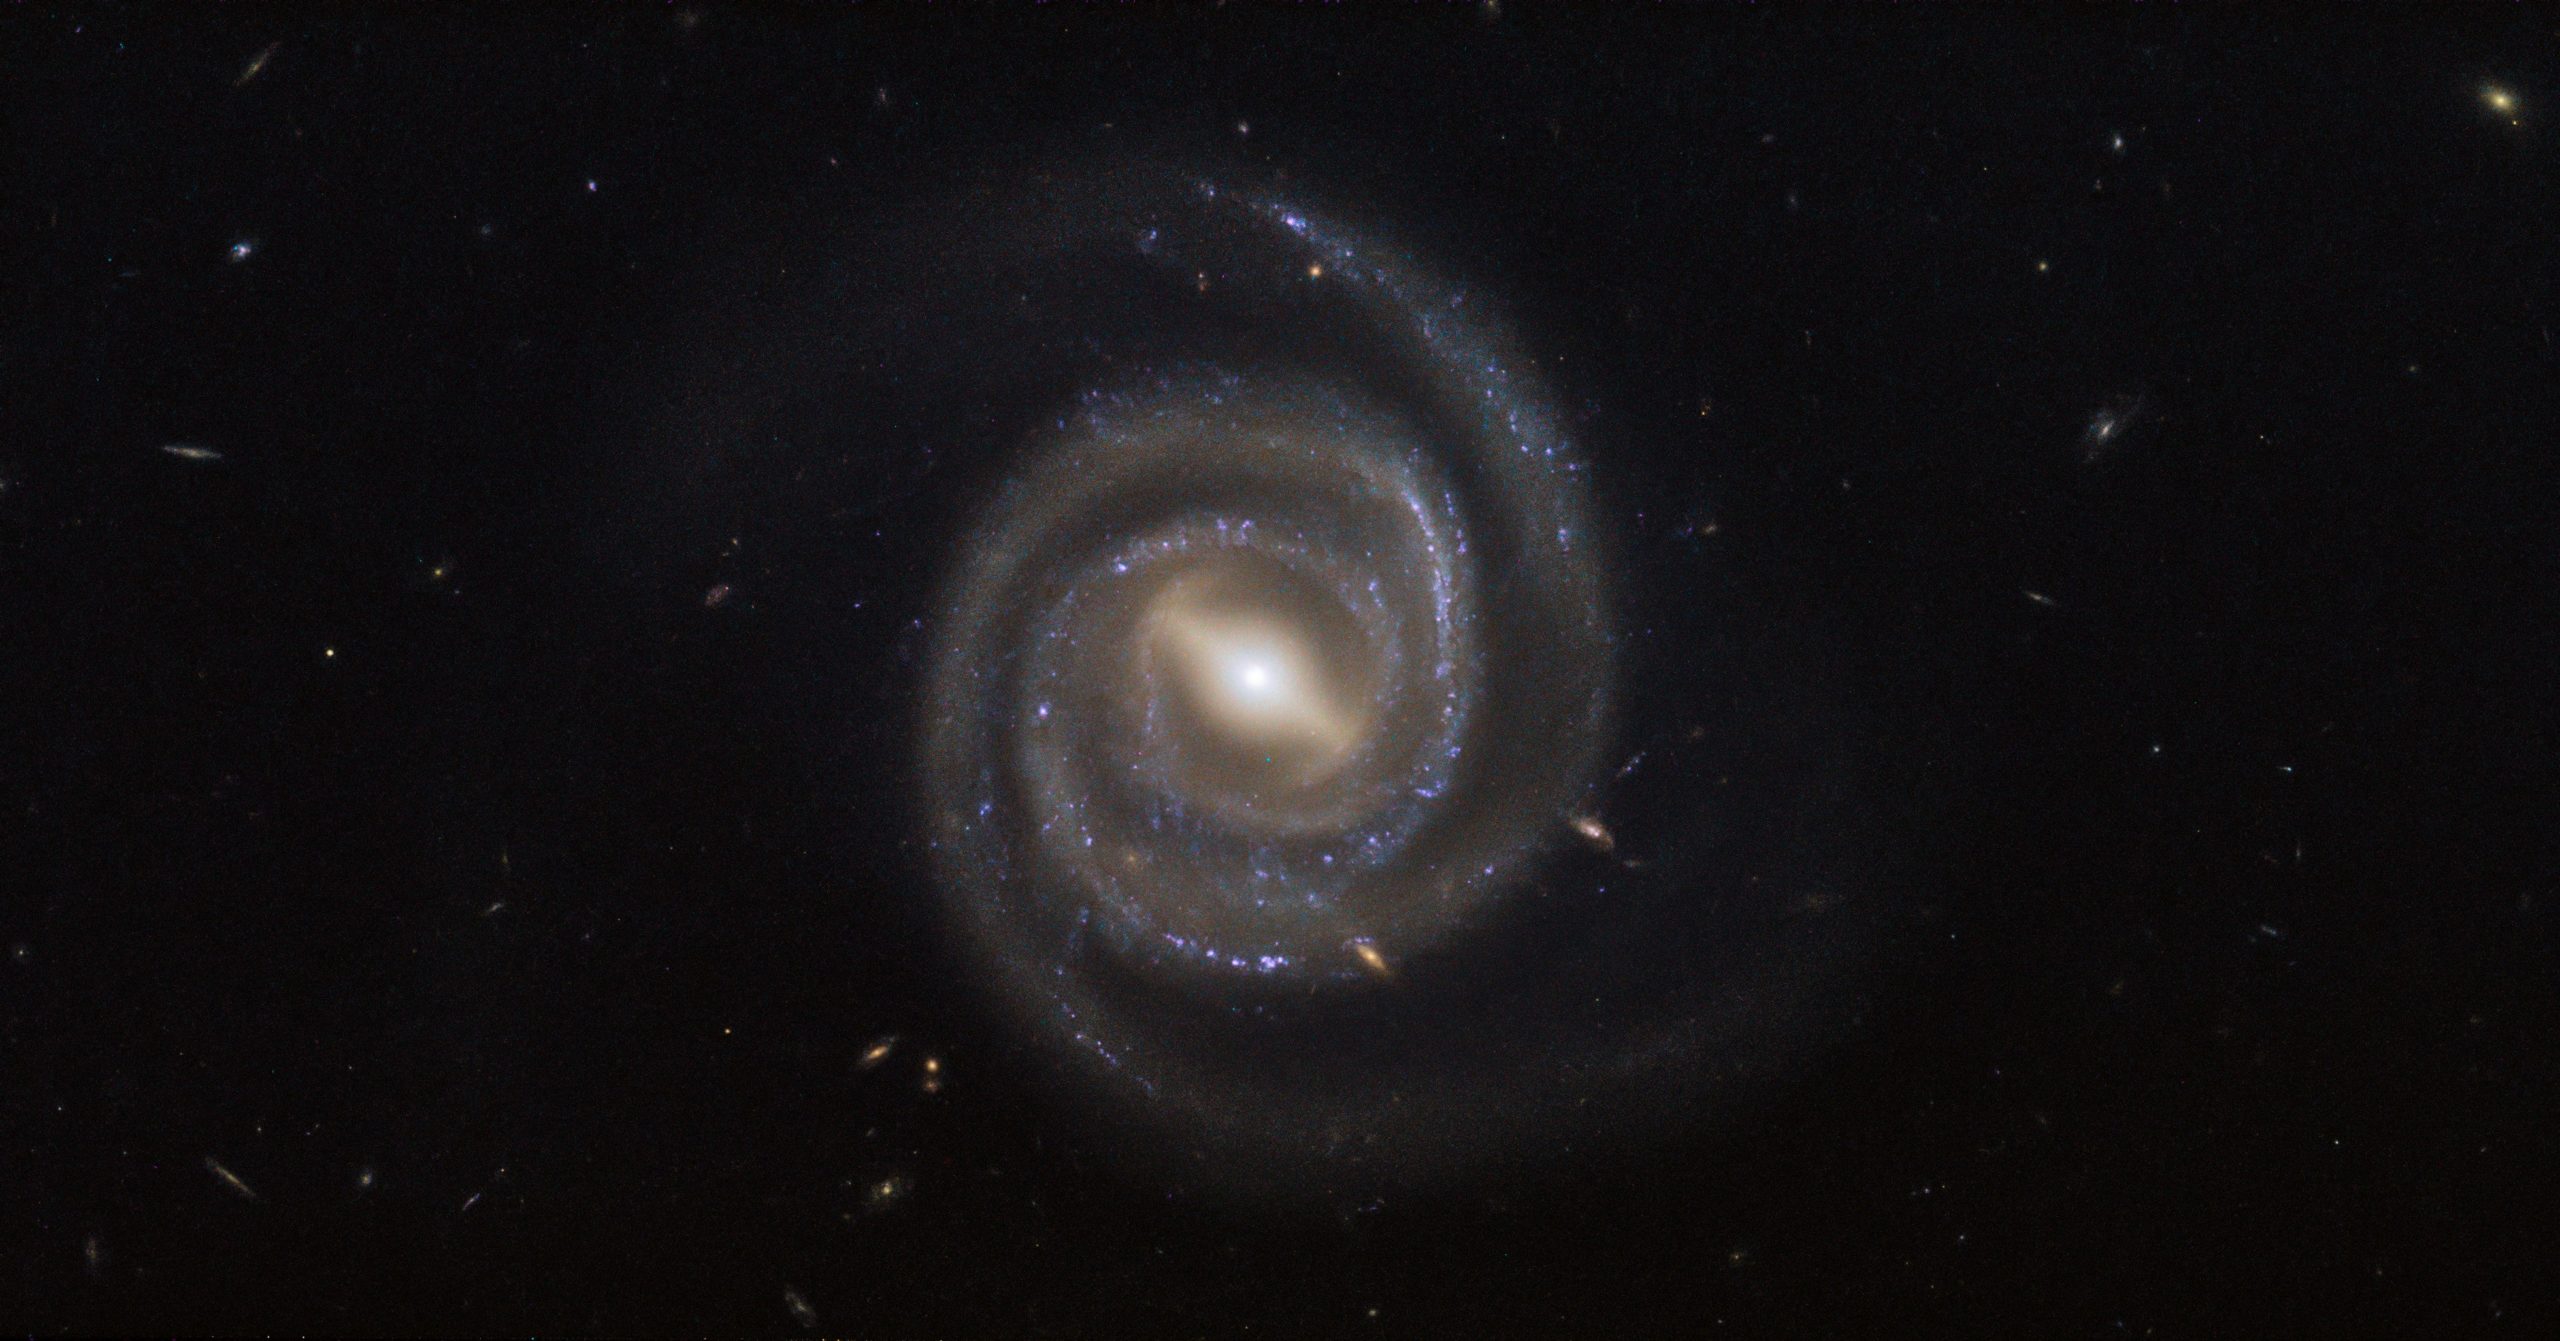 This Fuzzy Image Shows a Spiral Forming Soon After the Big Bang